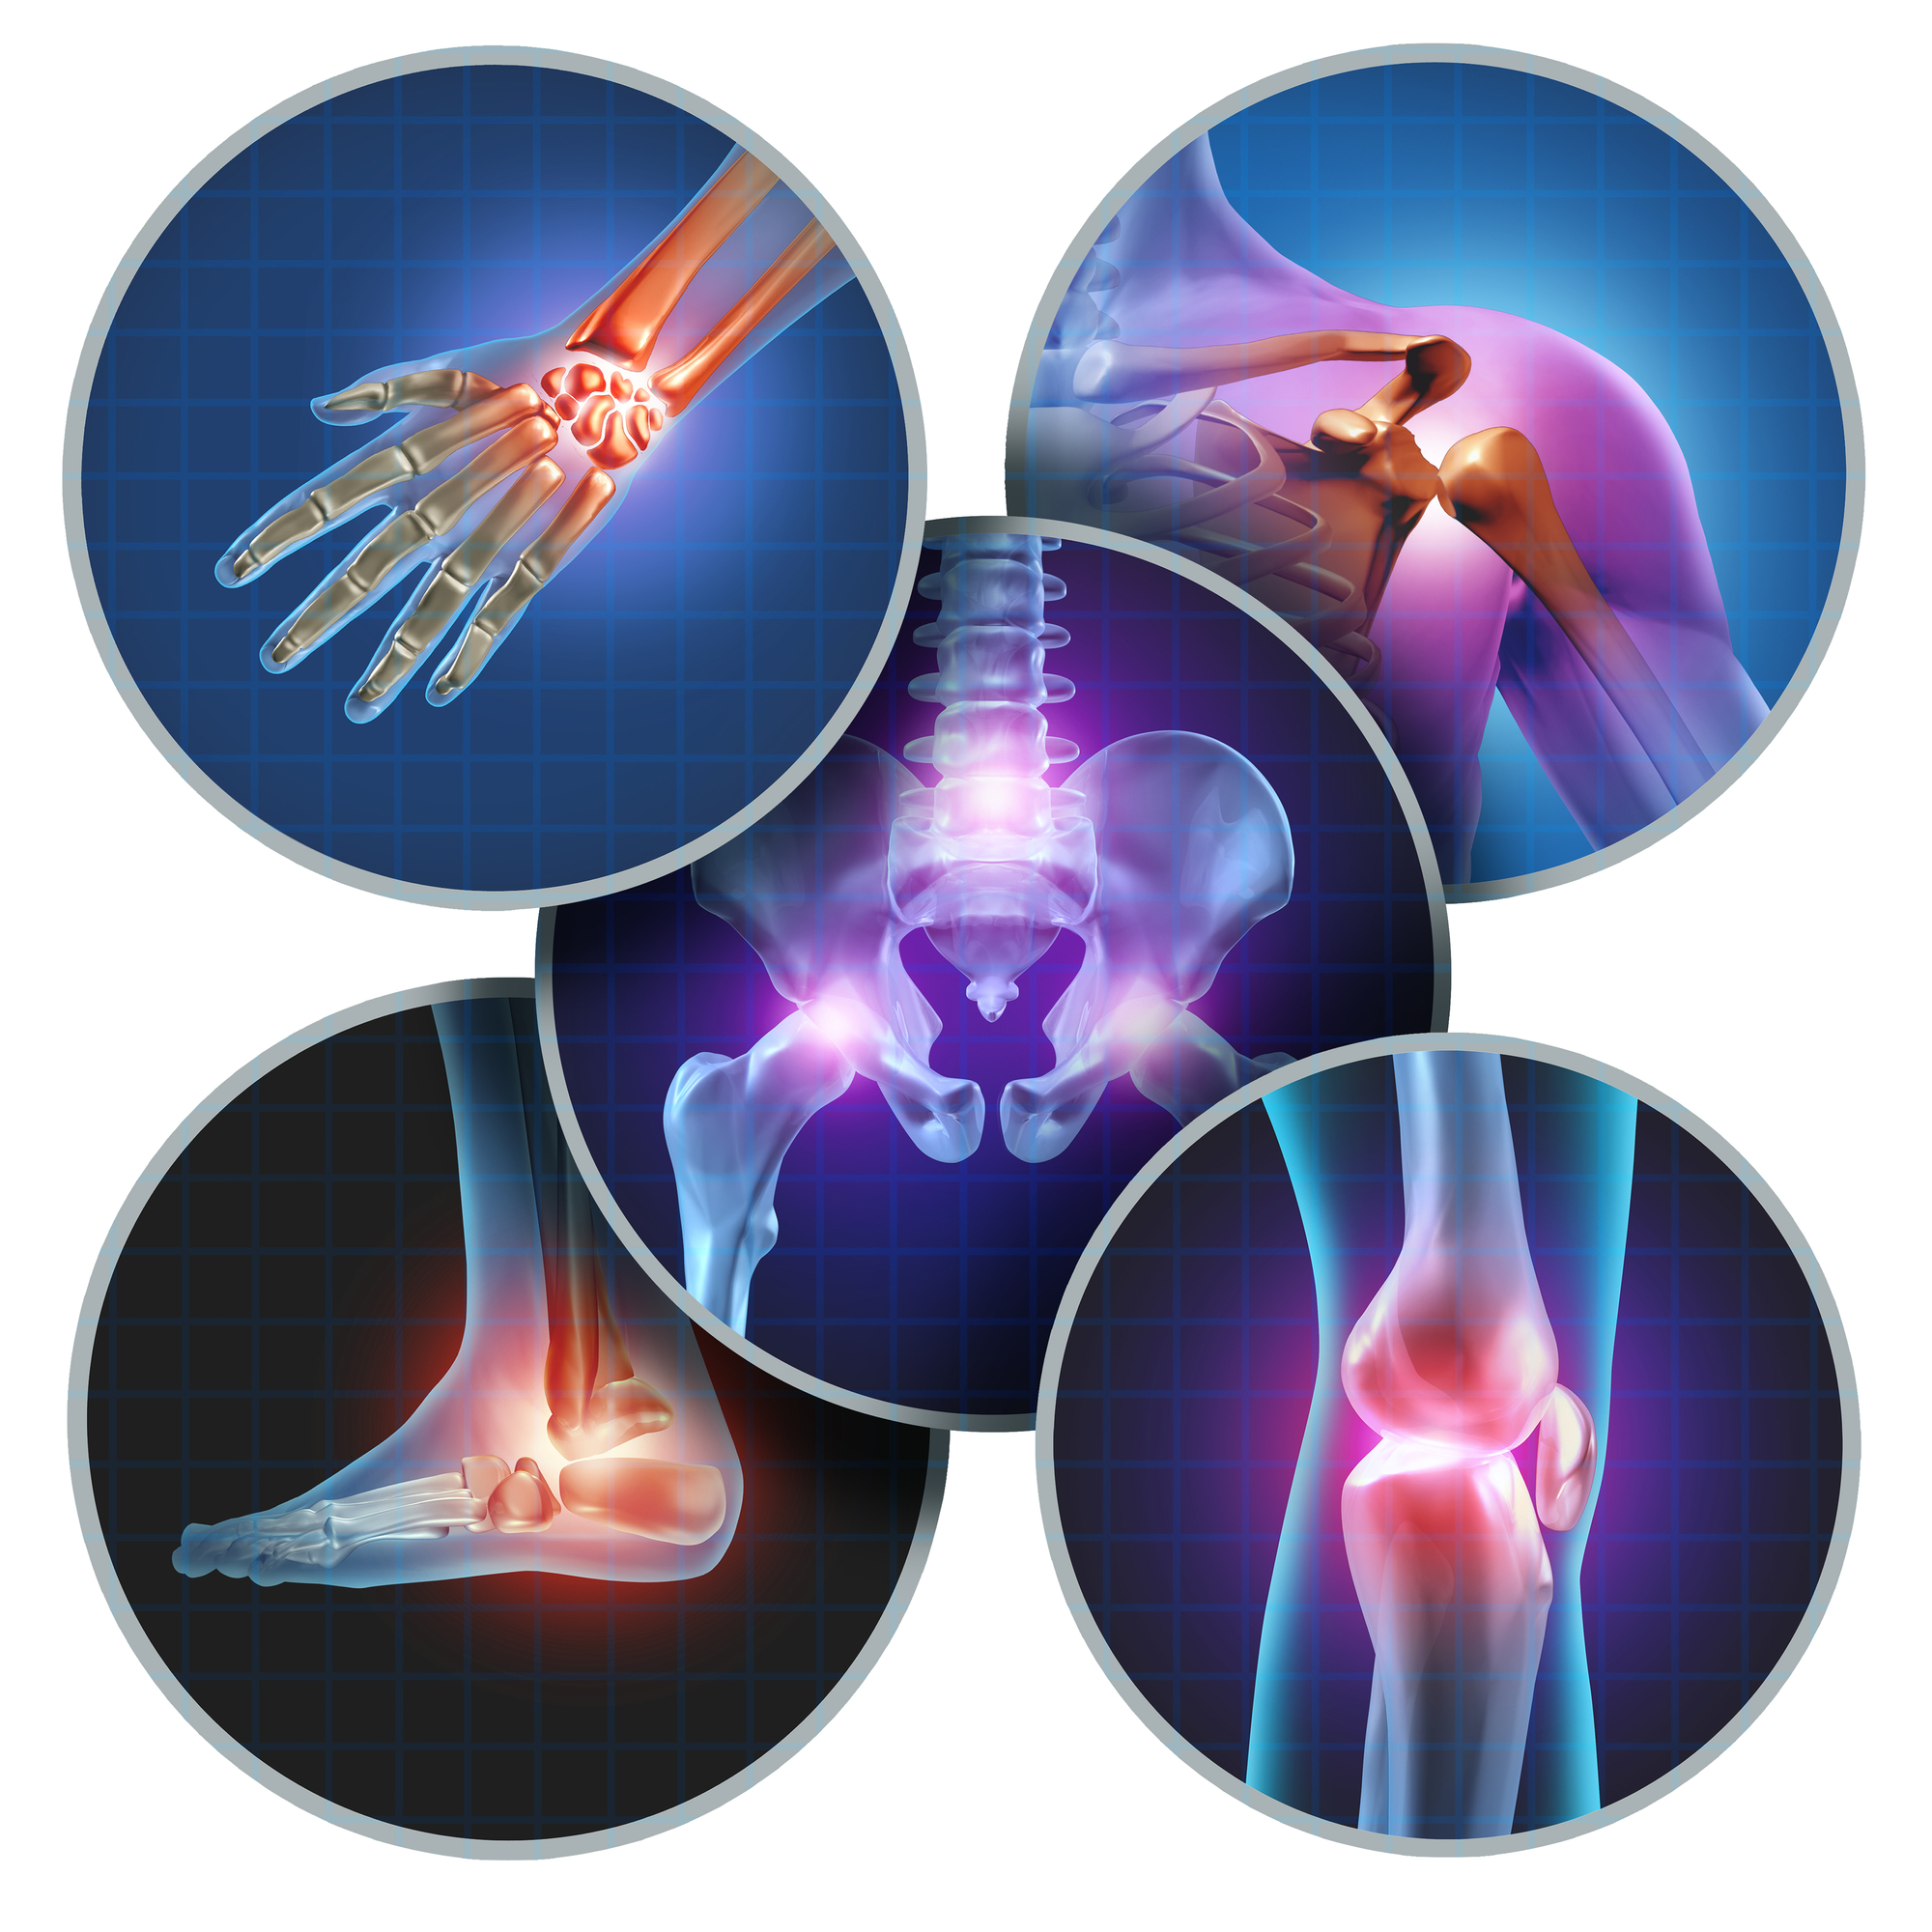 Signs You May Need Physical Therapy - Human Painful Joints